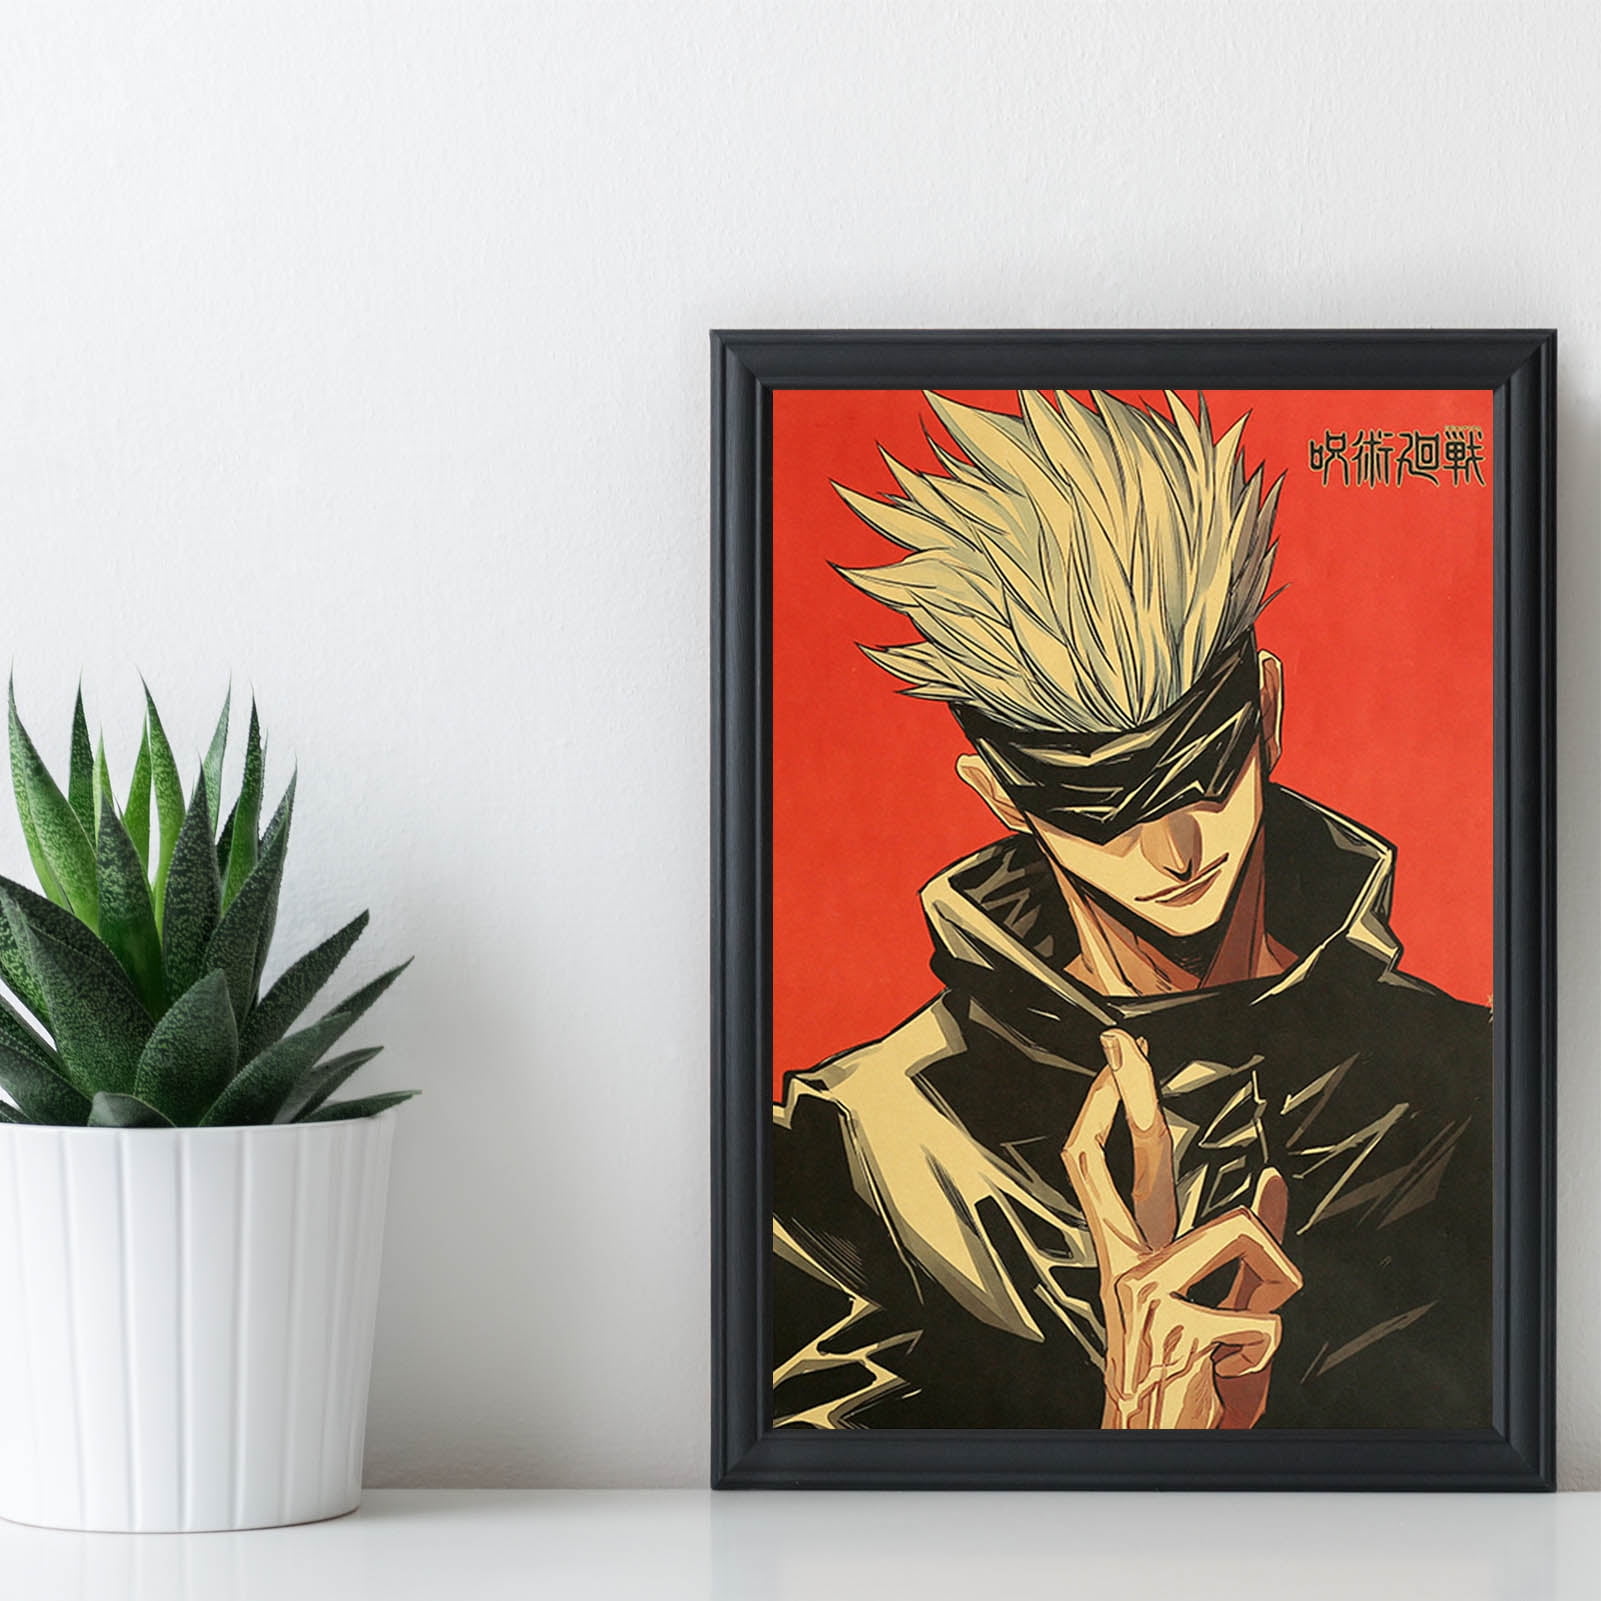 Anime Jjk Poster Manga Cover Wall Art Canvas Print Cartoon Posters for  Bedroom Living Room Wall Decor (8x12inch-Unframed,D)